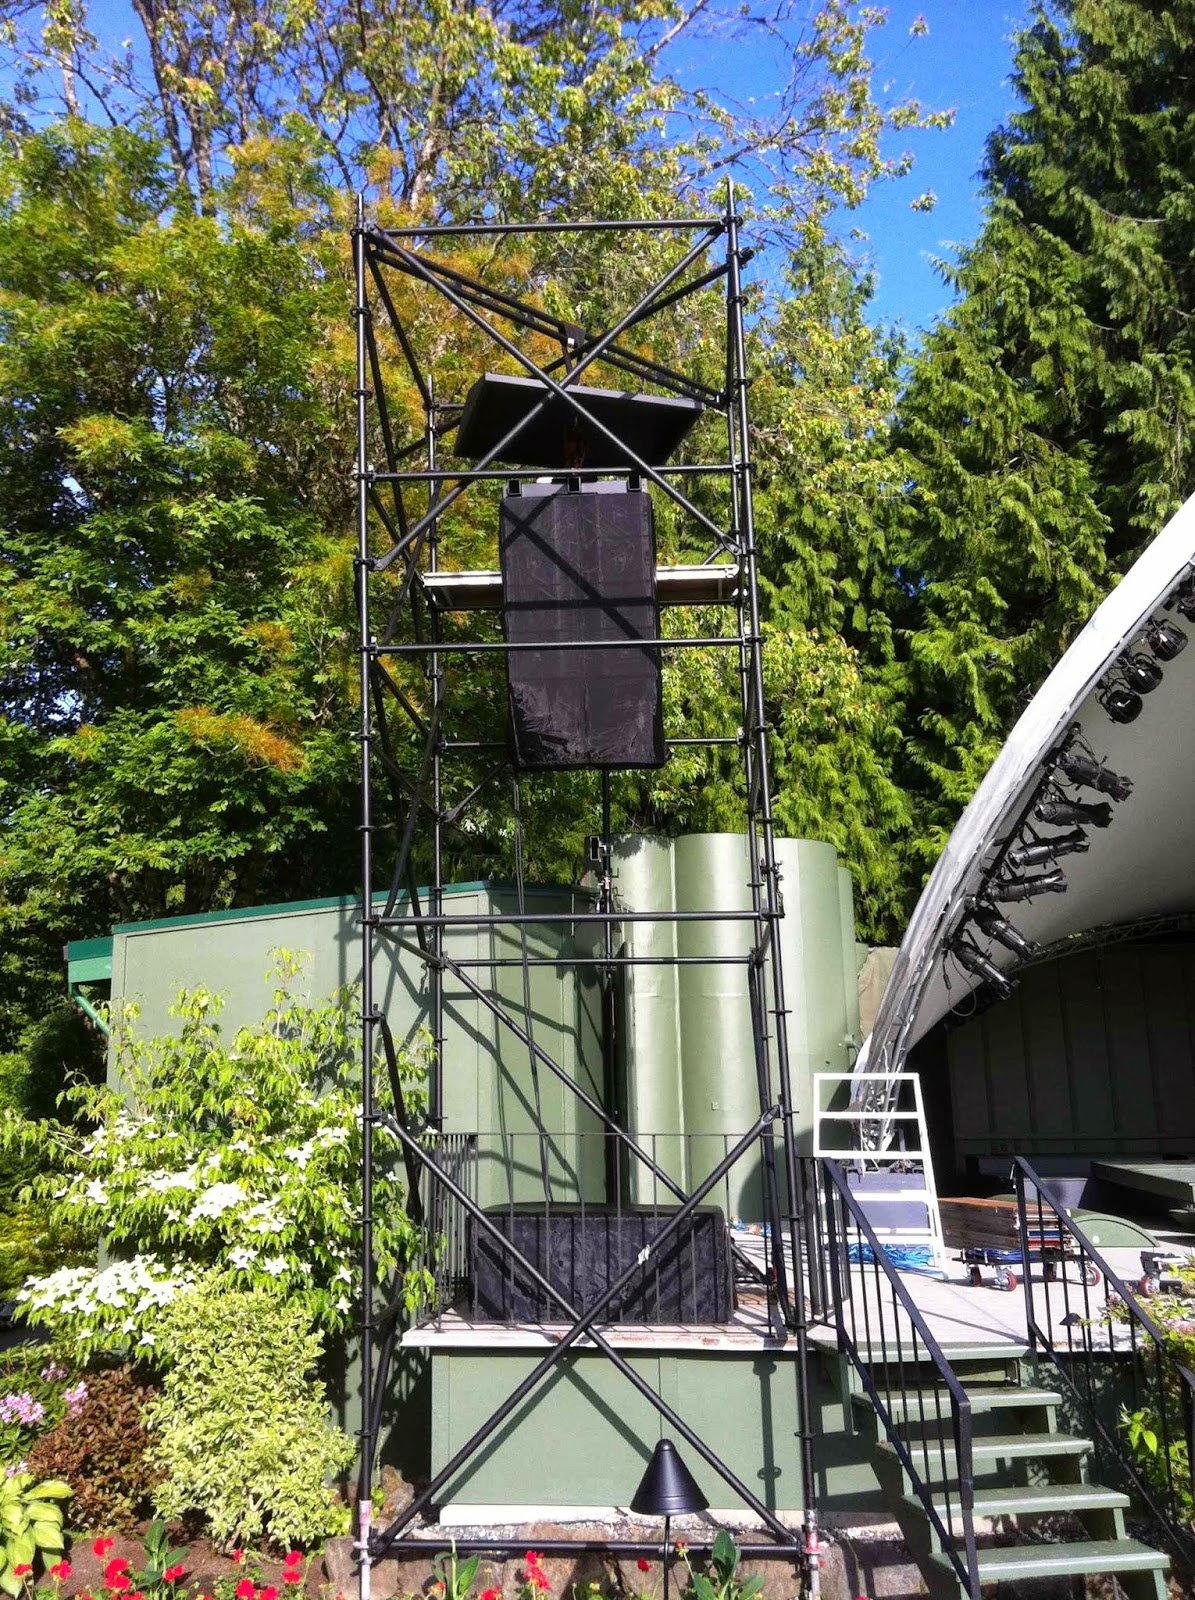 DL Sound & Lighting Productions Gives Butchart Gardens Great Sounds for the Summer with HARMAN’s JBL VTX Line Arrays and Crown I-Tech HD Amplifiers